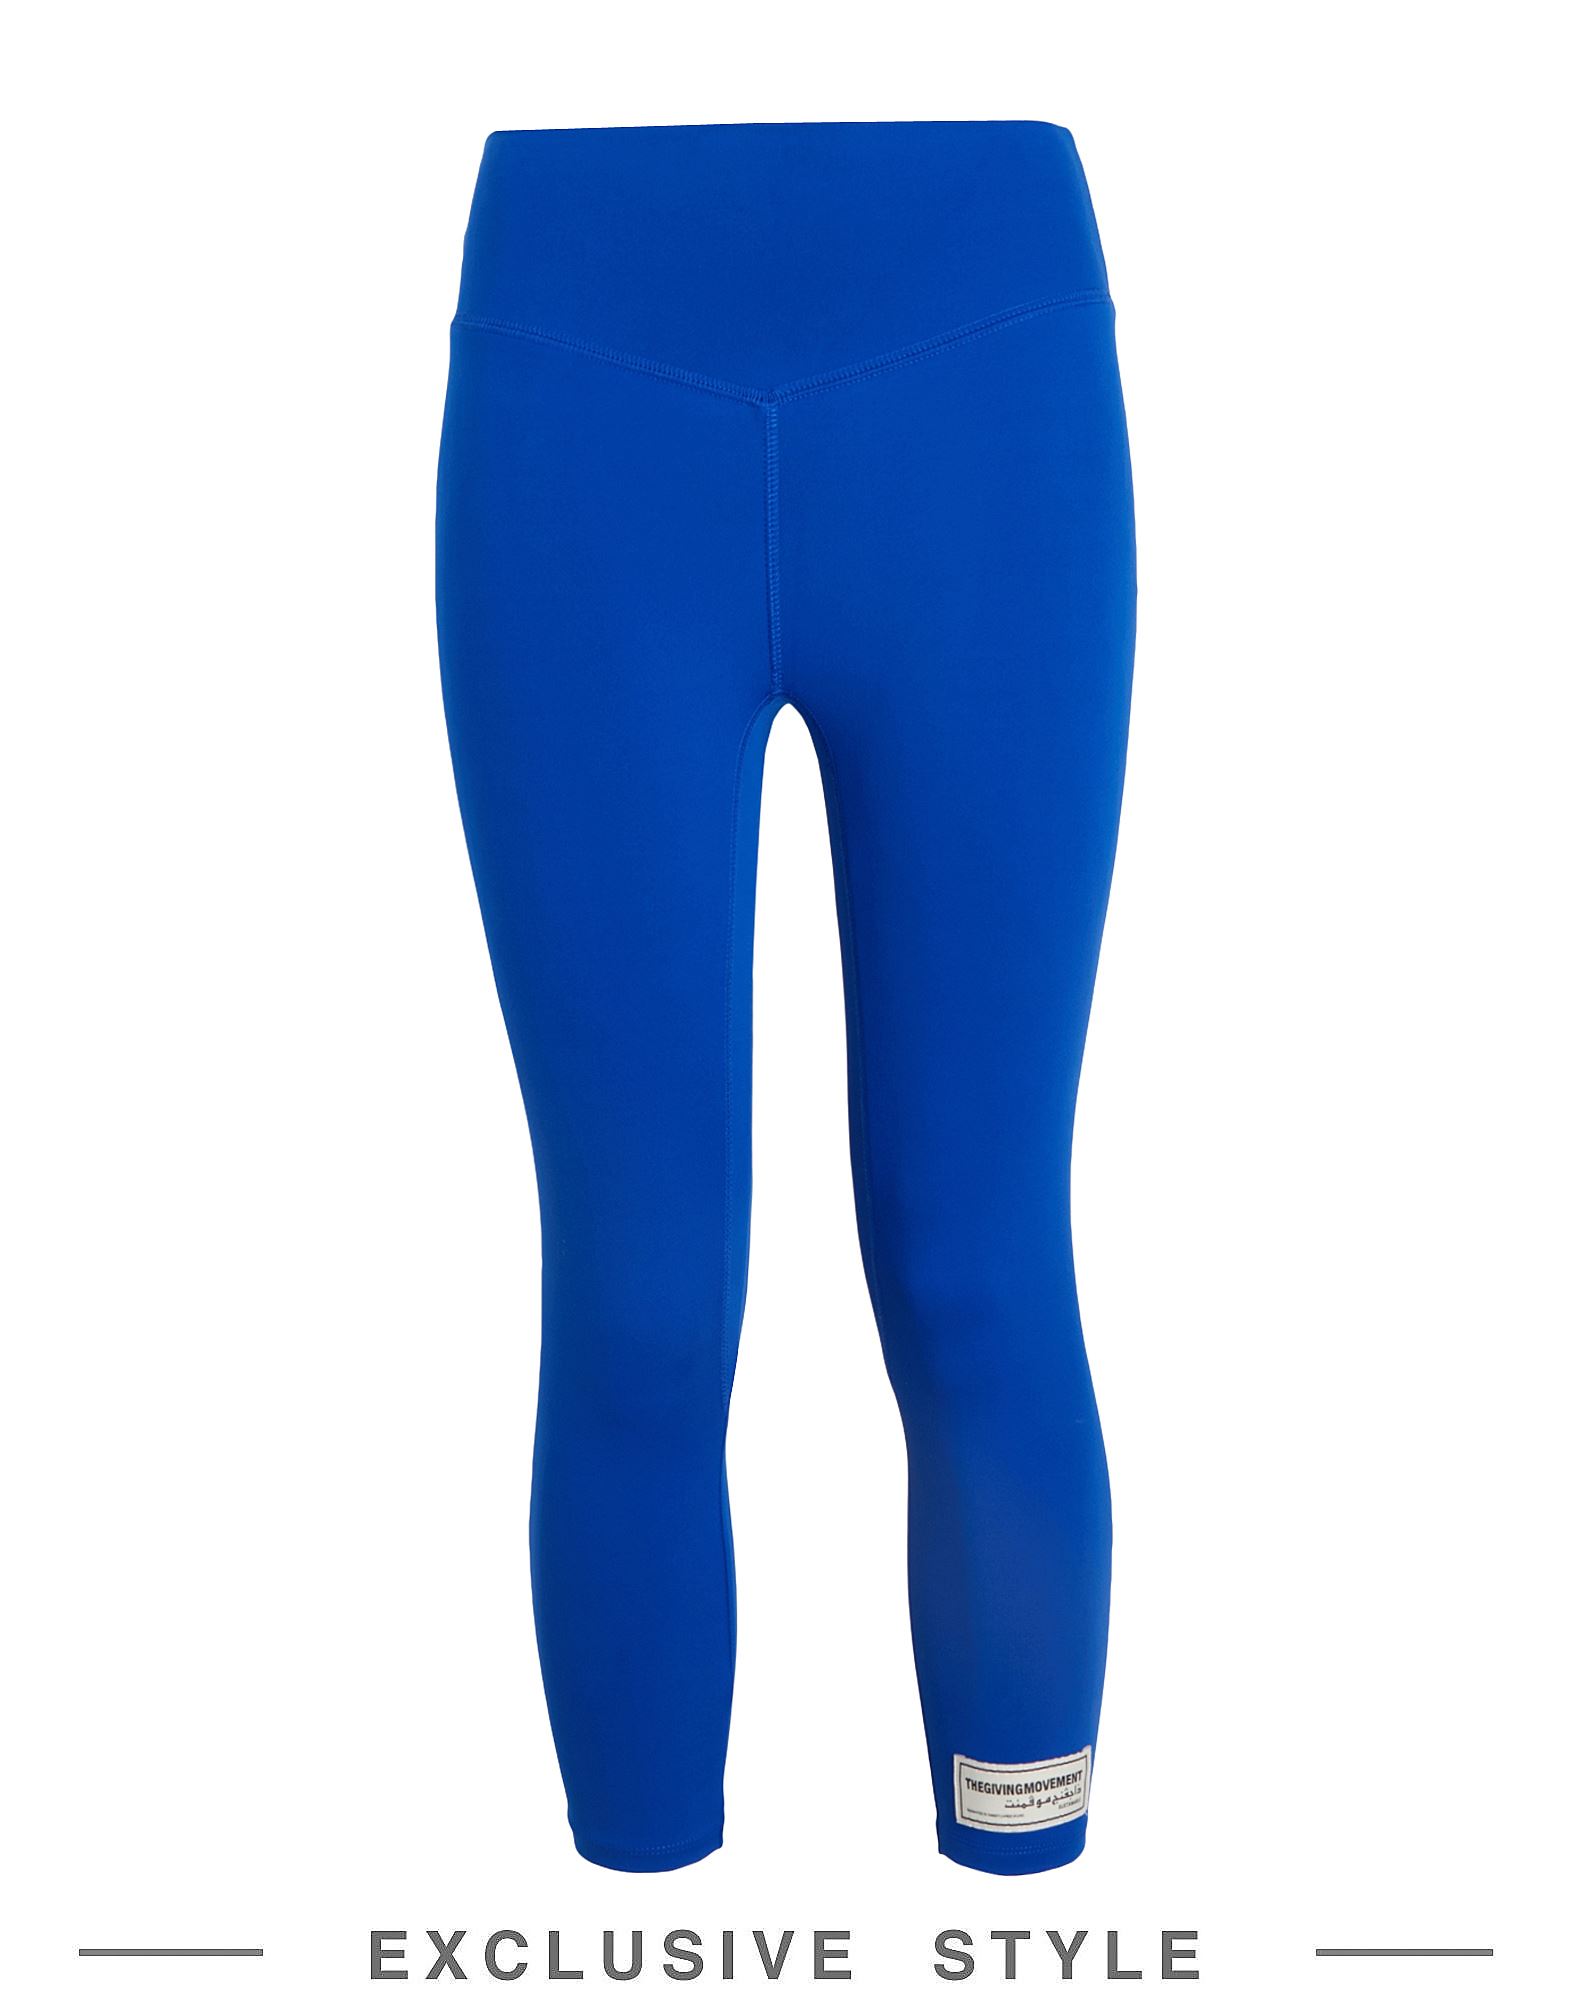 The Giving Movement X Yoox Leggings In Blue